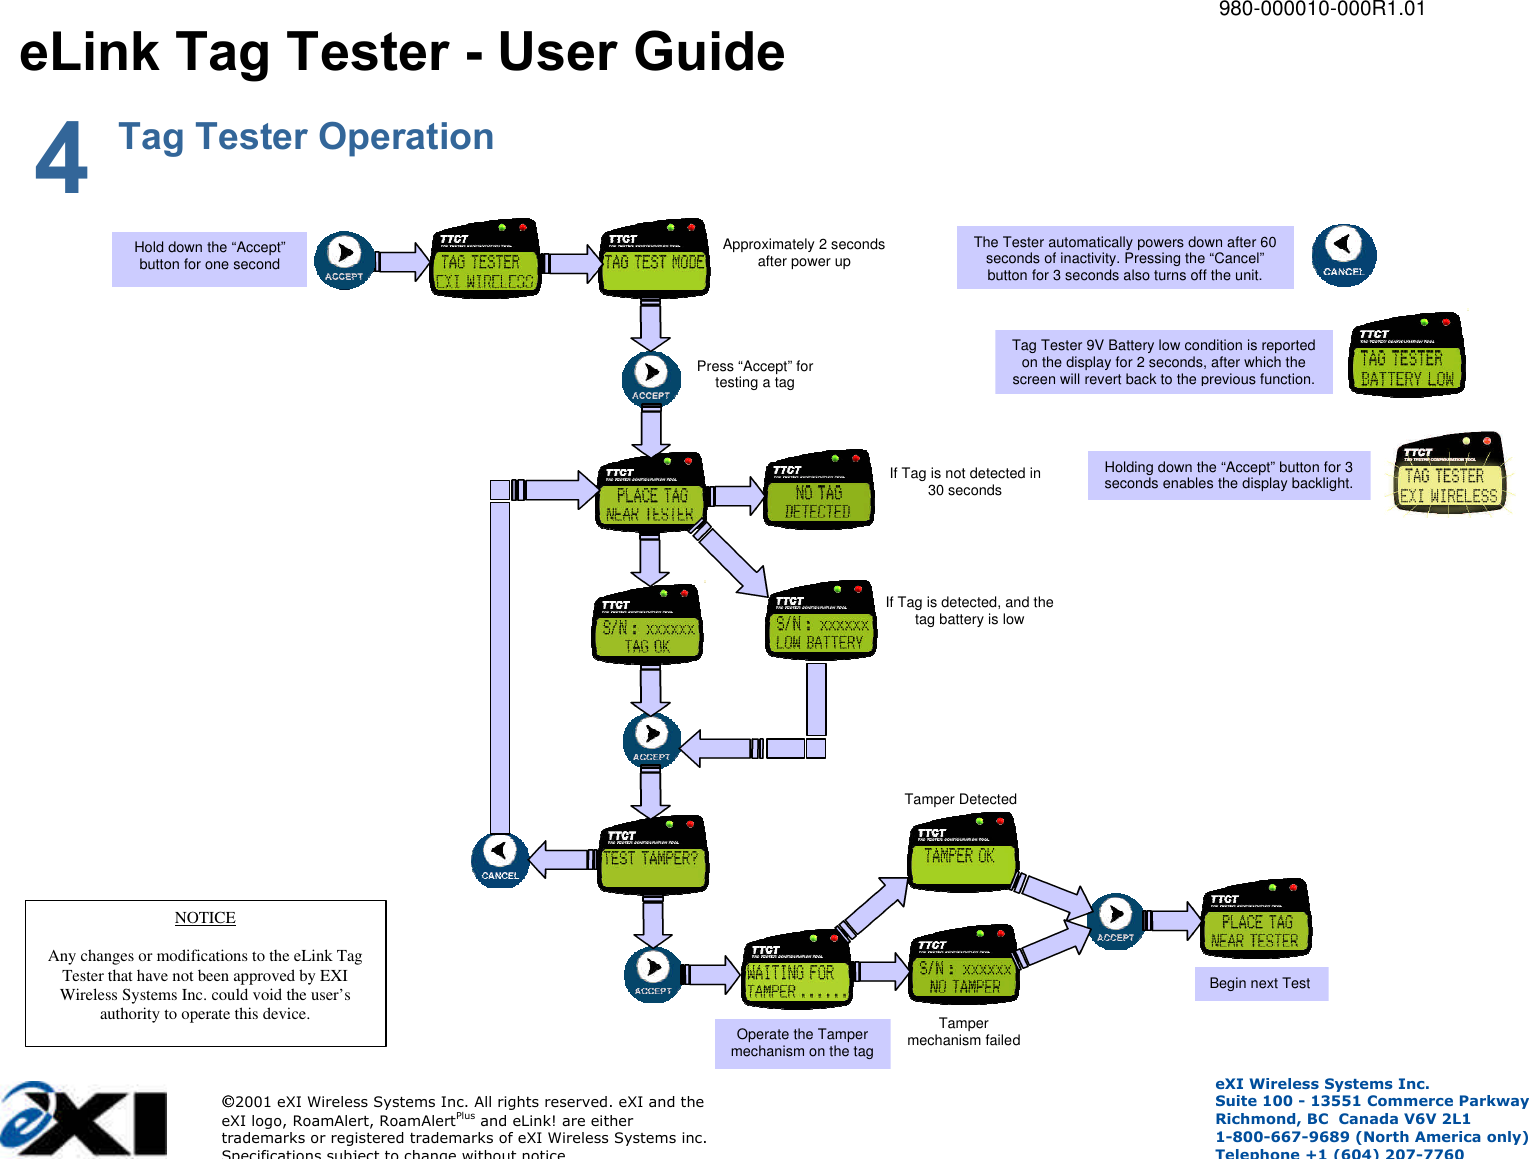         980-000010-000R1.01 eLink Tag Tester - User Guide             4 Tag Tester Operation 2001 eXI Wireless Systems Inc. All rights reserved. eXI and the eXI logo, RoamAlert, RoamAlertPlus and eLink! are either trademarks or registered trademarks of eXI Wireless Systems inc. Specifications subject to change without notice eXI Wireless Systems Inc. Suite 100 - 13551 Commerce Parkway Richmond, BC  Canada V6V 2L1 1-800-667-9689 (North America only) Telephone +1 (604) 207-7760 Hold down the “Accept” button for one second Press “Accept” for testing a tag If Tag is not detected in 30 seconds If Tag is detected, and the tag battery is low Operate the Tamper mechanism on the tag  Tamper  mechanism failed     Begin next Test Tamper Detected Approximately 2 seconds after power up  The Tester automatically powers down after 60 seconds of inactivity. Pressing the “Cancel” button for 3 seconds also turns off the unit. Tag Tester 9V Battery low condition is reported on the display for 2 seconds, after which the screen will revert back to the previous function. Holding down the “Accept” button for 3 seconds enables the display backlight. NOTICE  Any changes or modifications to the eLink Tag Tester that have not been approved by EXI Wireless Systems Inc. could void the user’s authority to operate this device. 